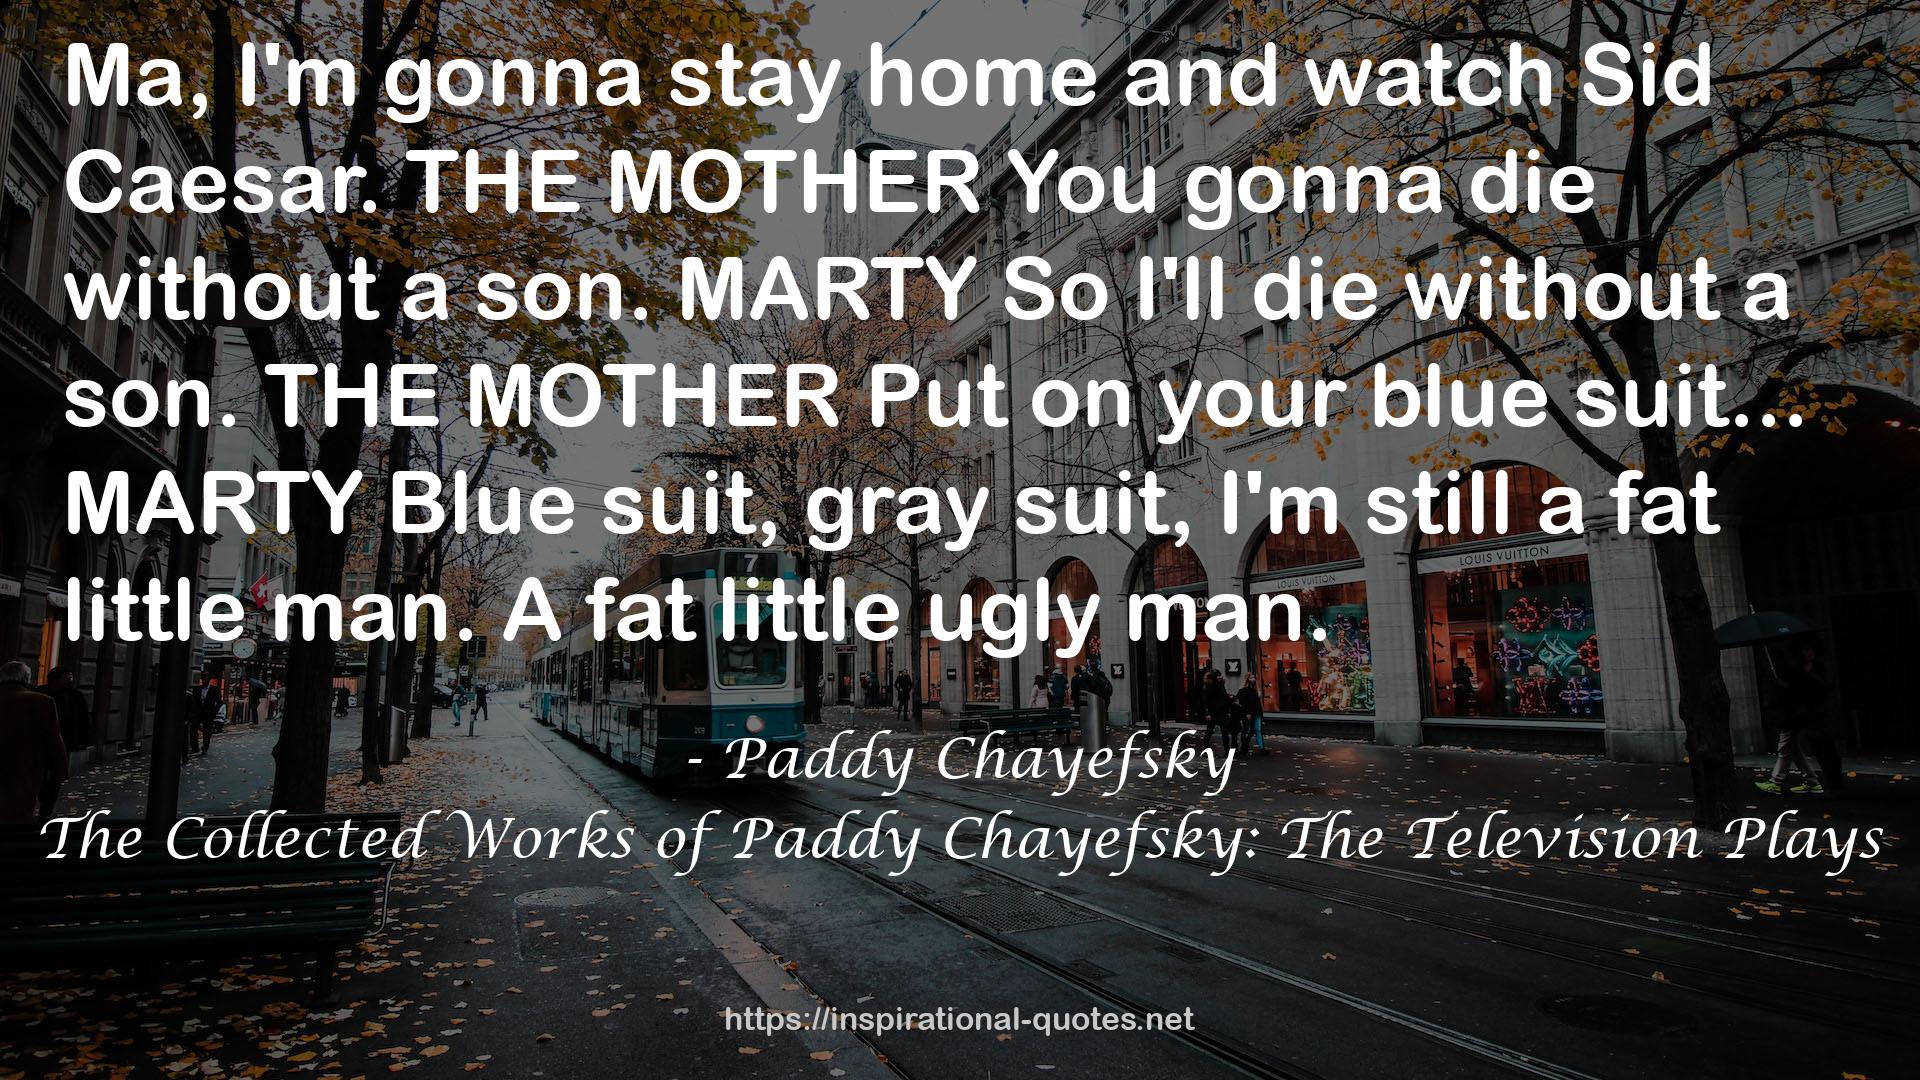 The Collected Works of Paddy Chayefsky: The Television Plays QUOTES